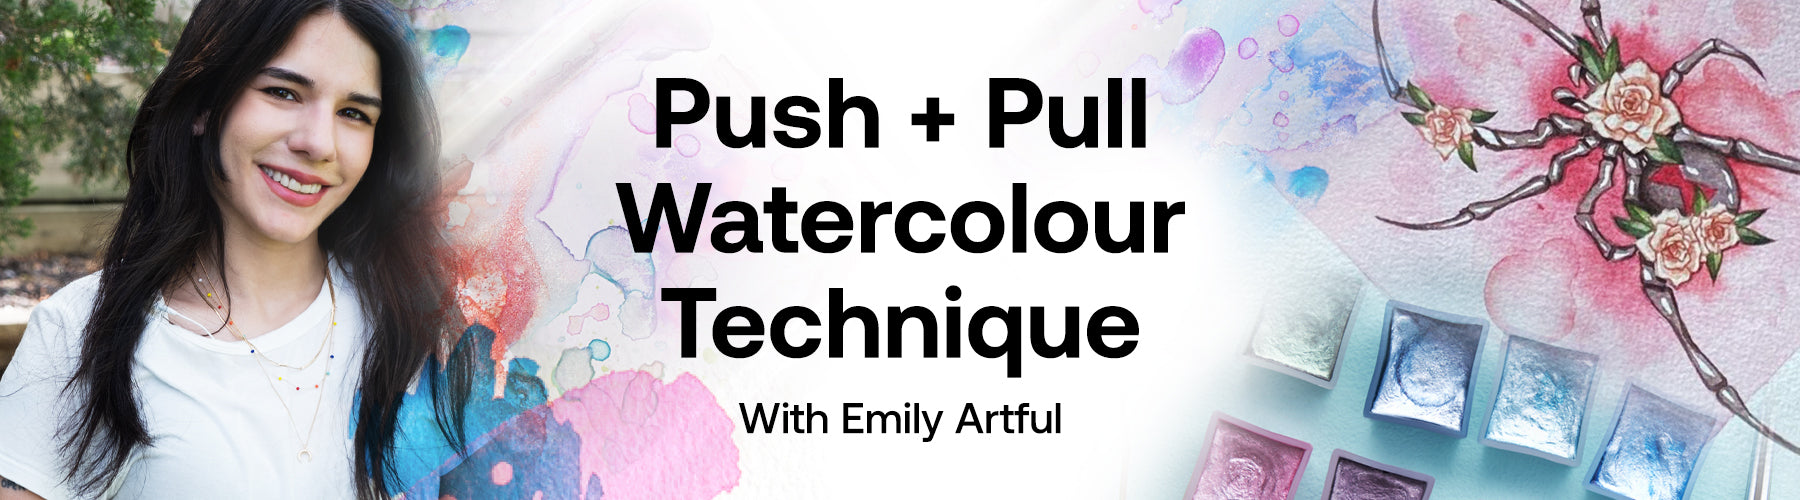 Push and Pull Technique with Emily Artful